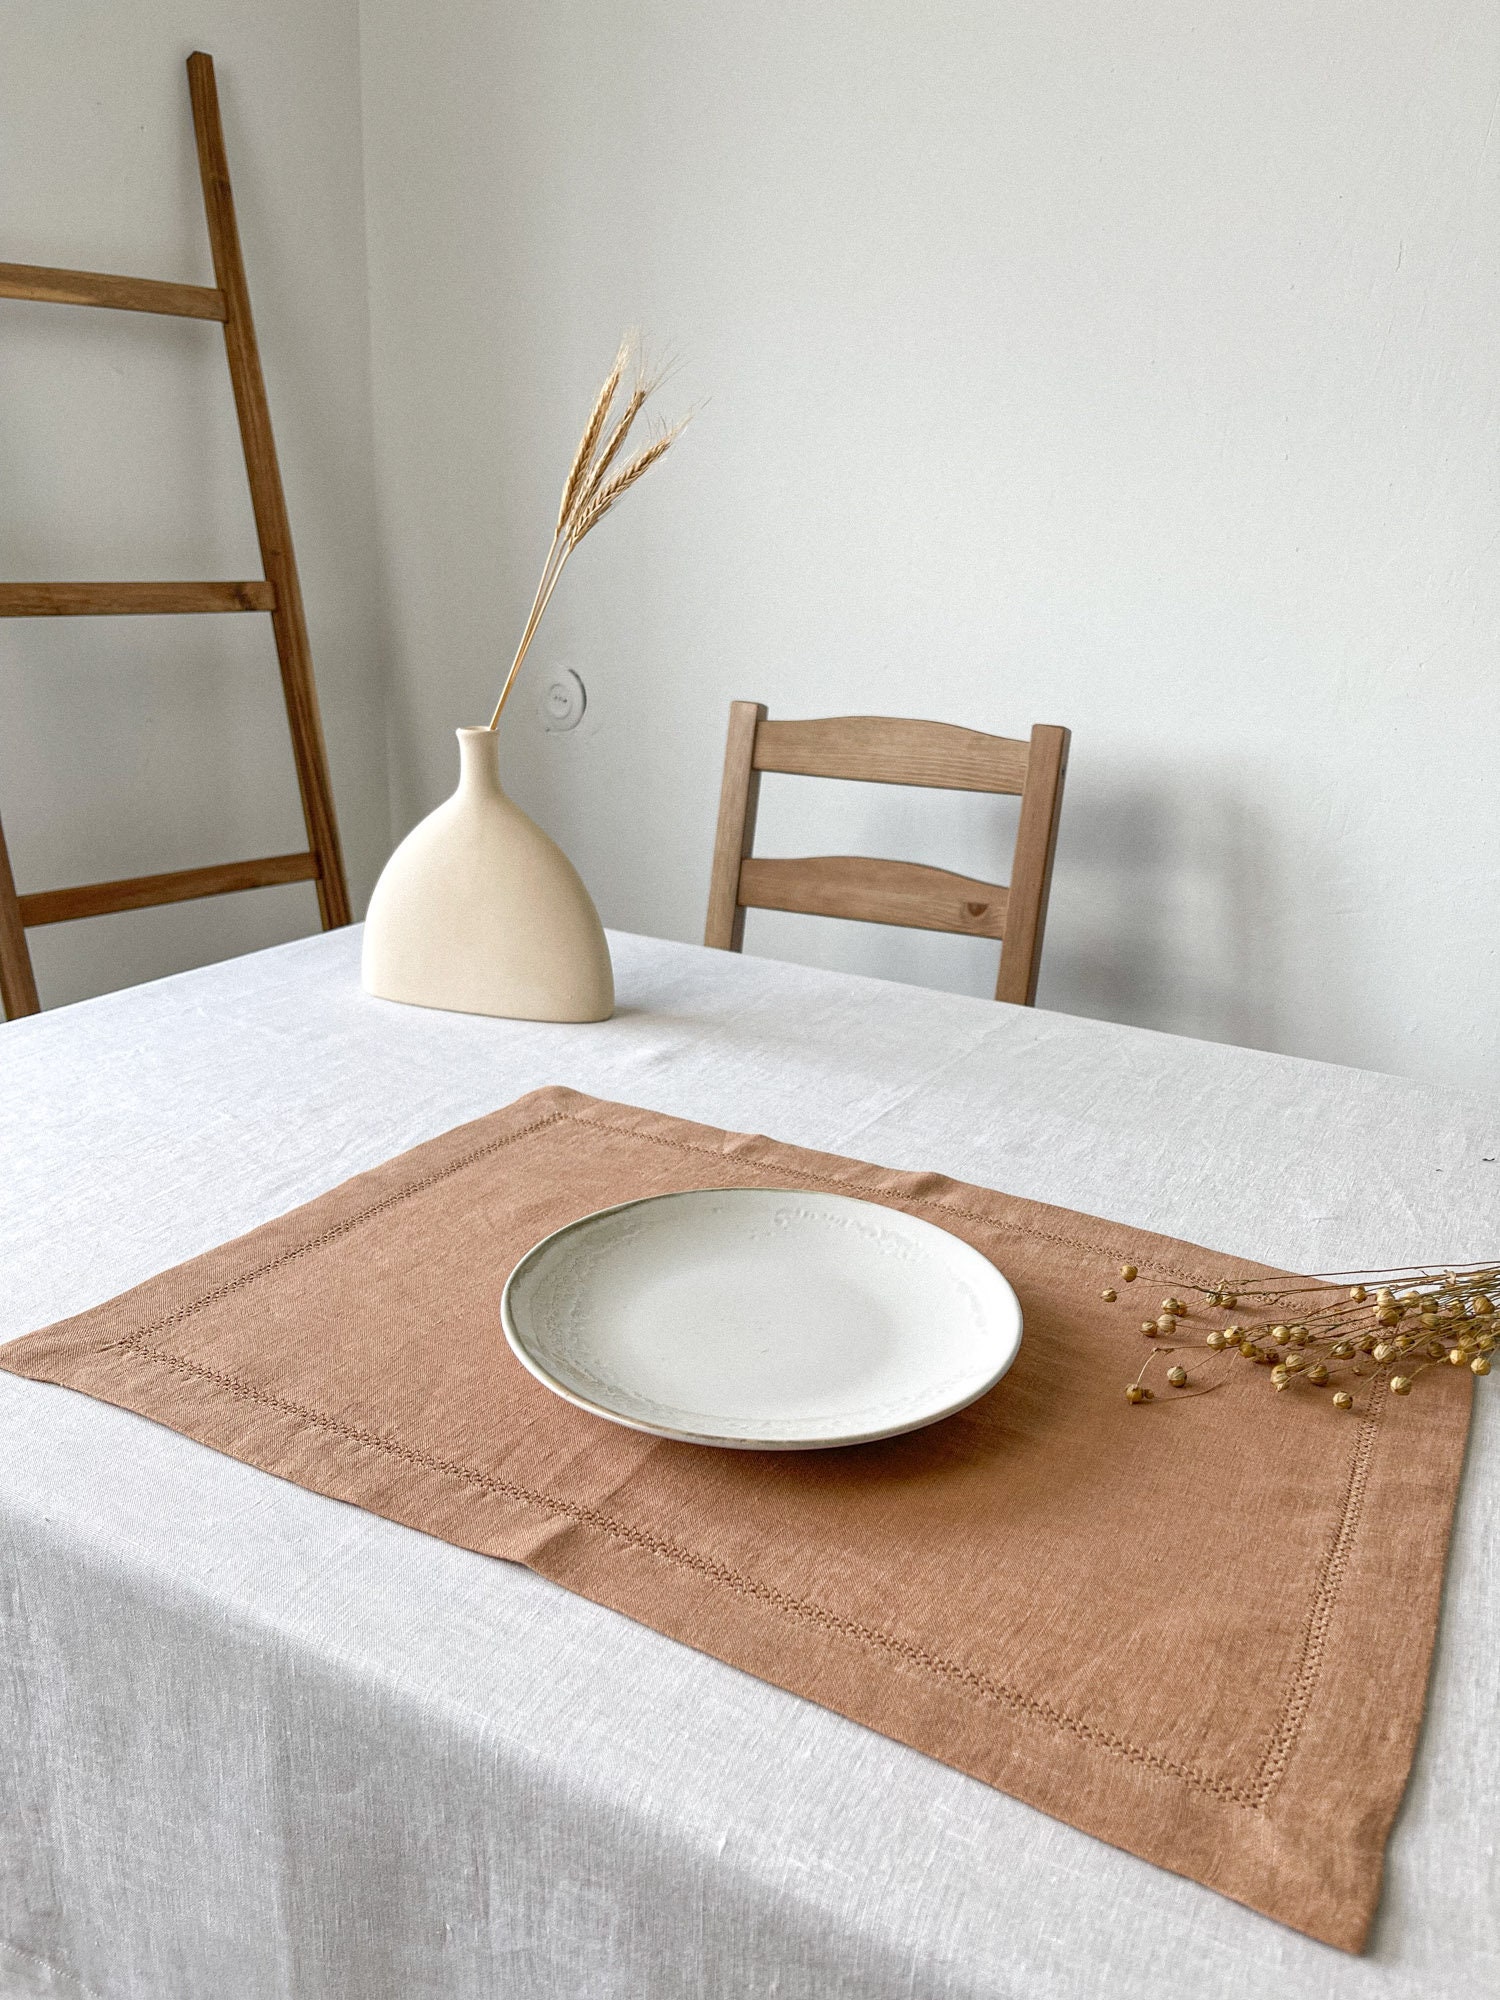 Hemstitch Linen Placemats Set in Tan Color Handmade - Etsy